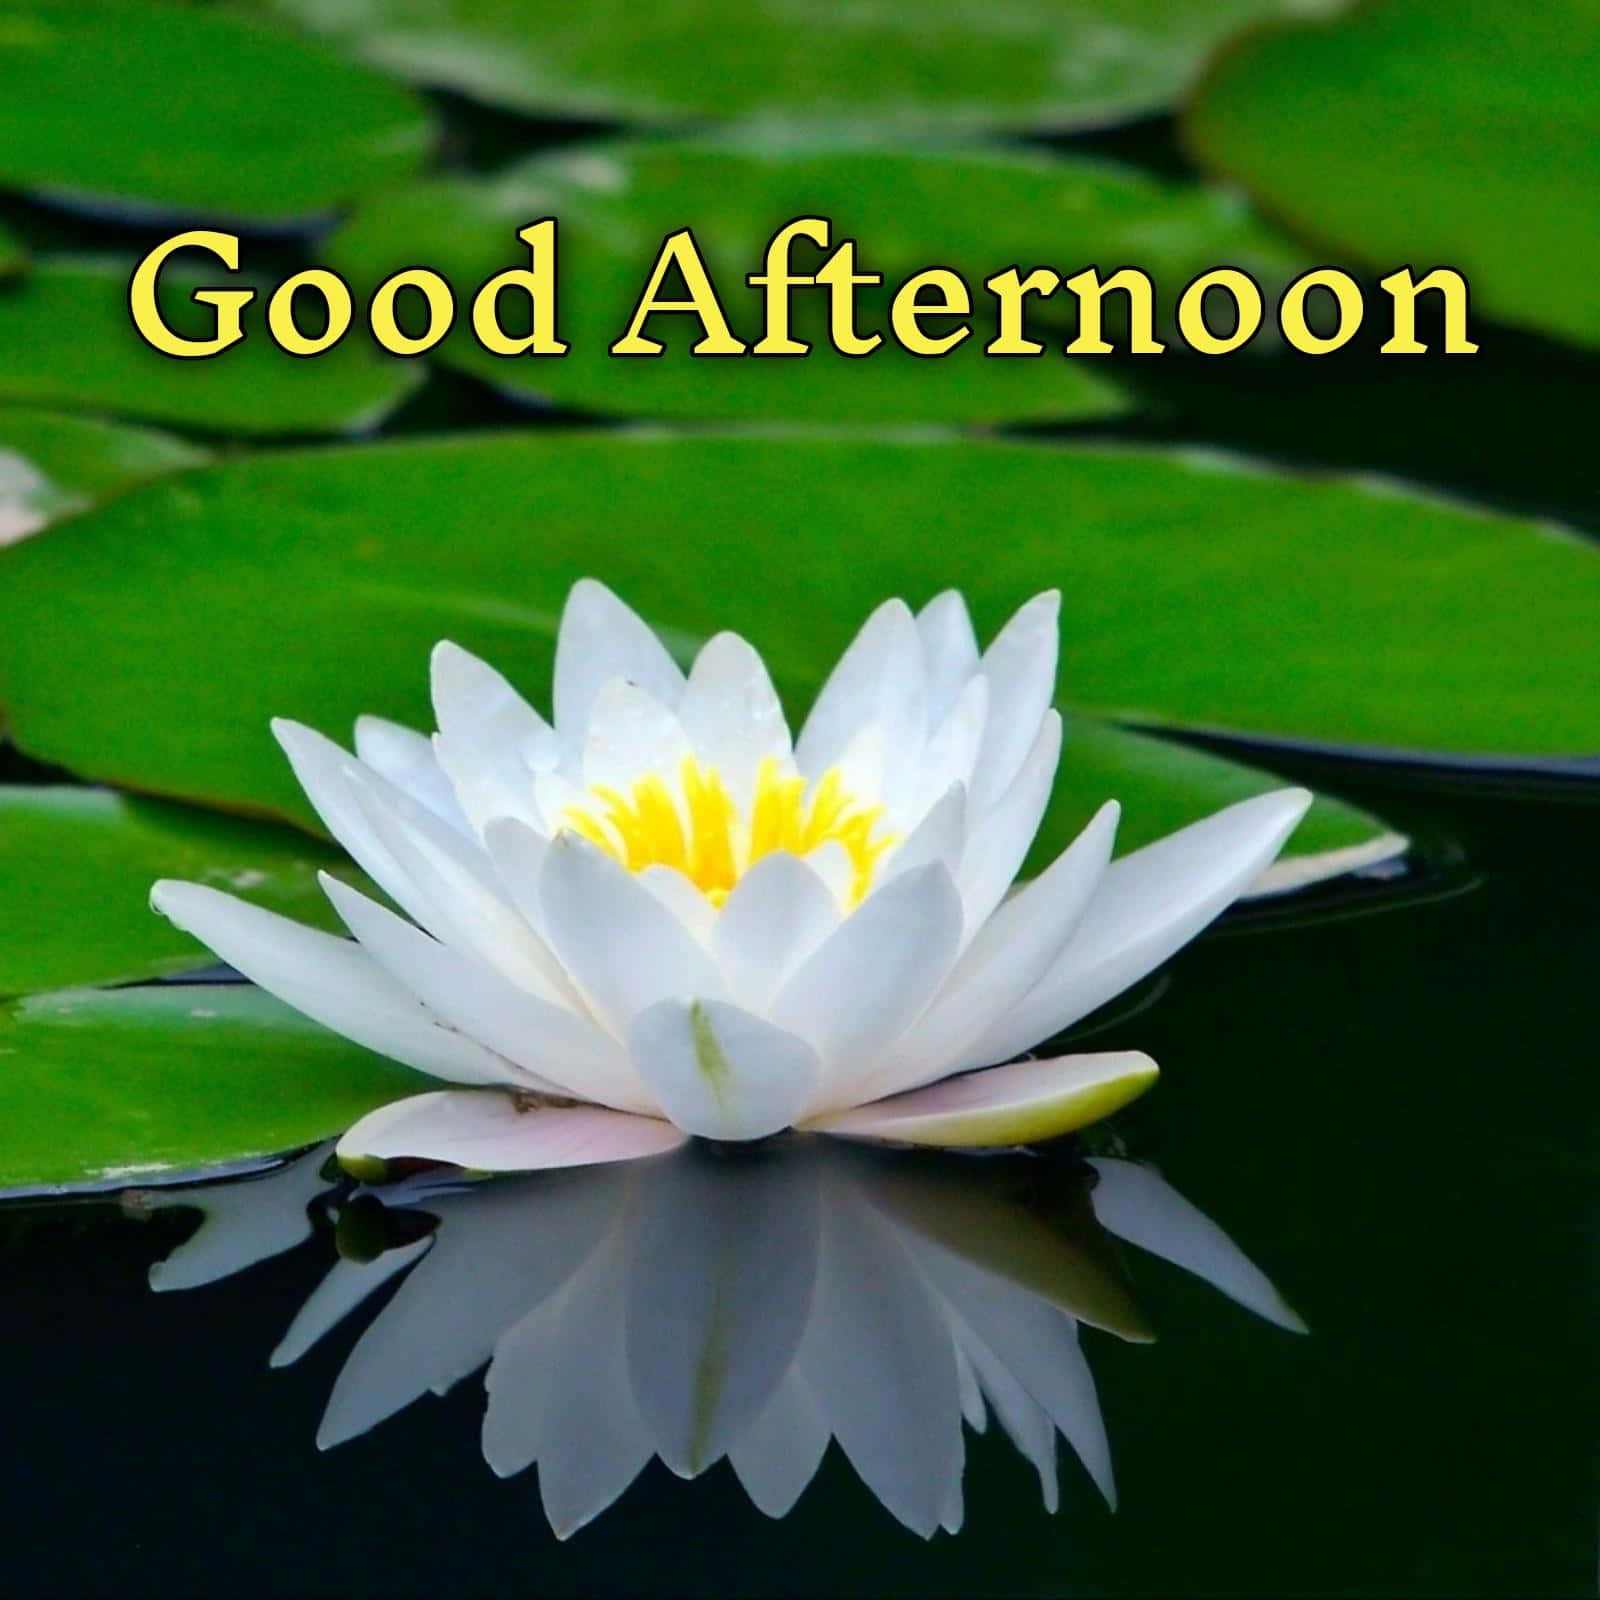 Download Good Afternoon Greetings Lotus Picture | Wallpapers.com